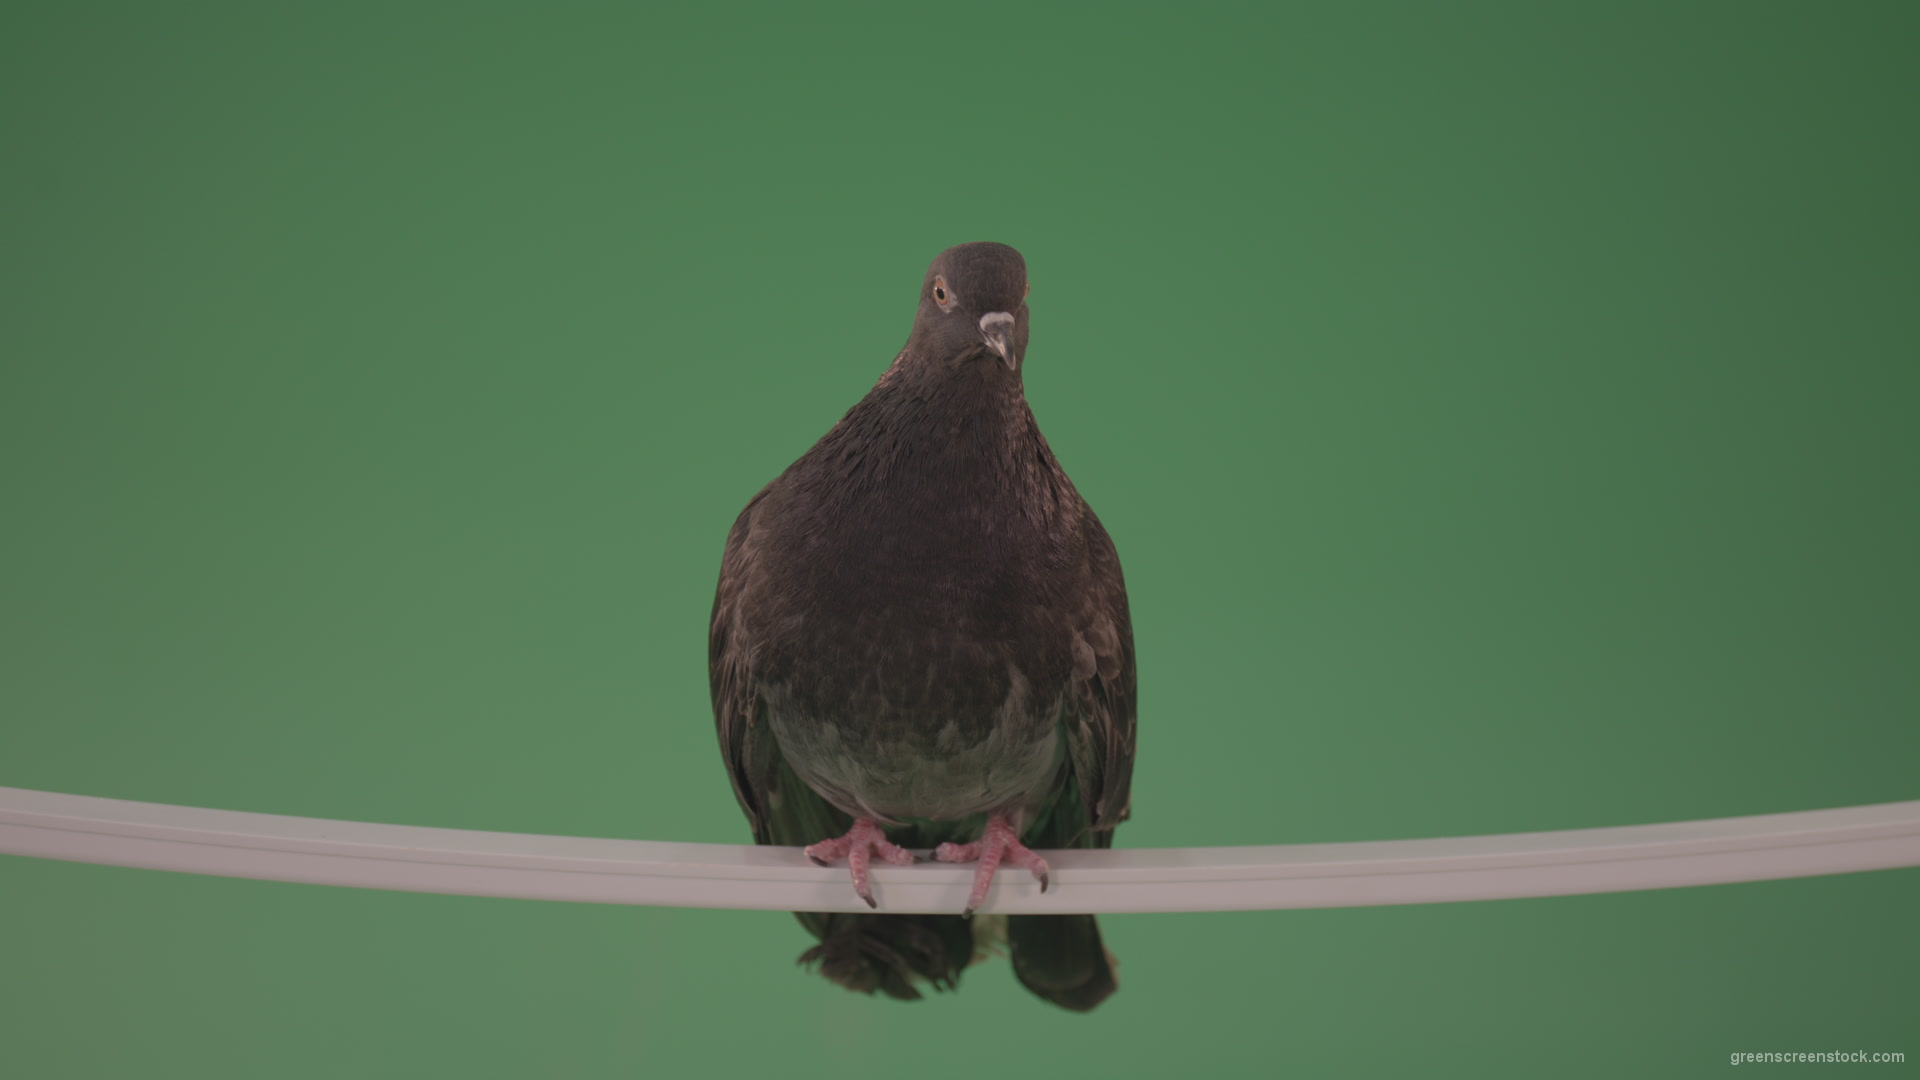 Gray-wild-bird-doves-sitting-on-a-branch-in-the-city-isolated-in-green-screen-studio_005 Green Screen Stock